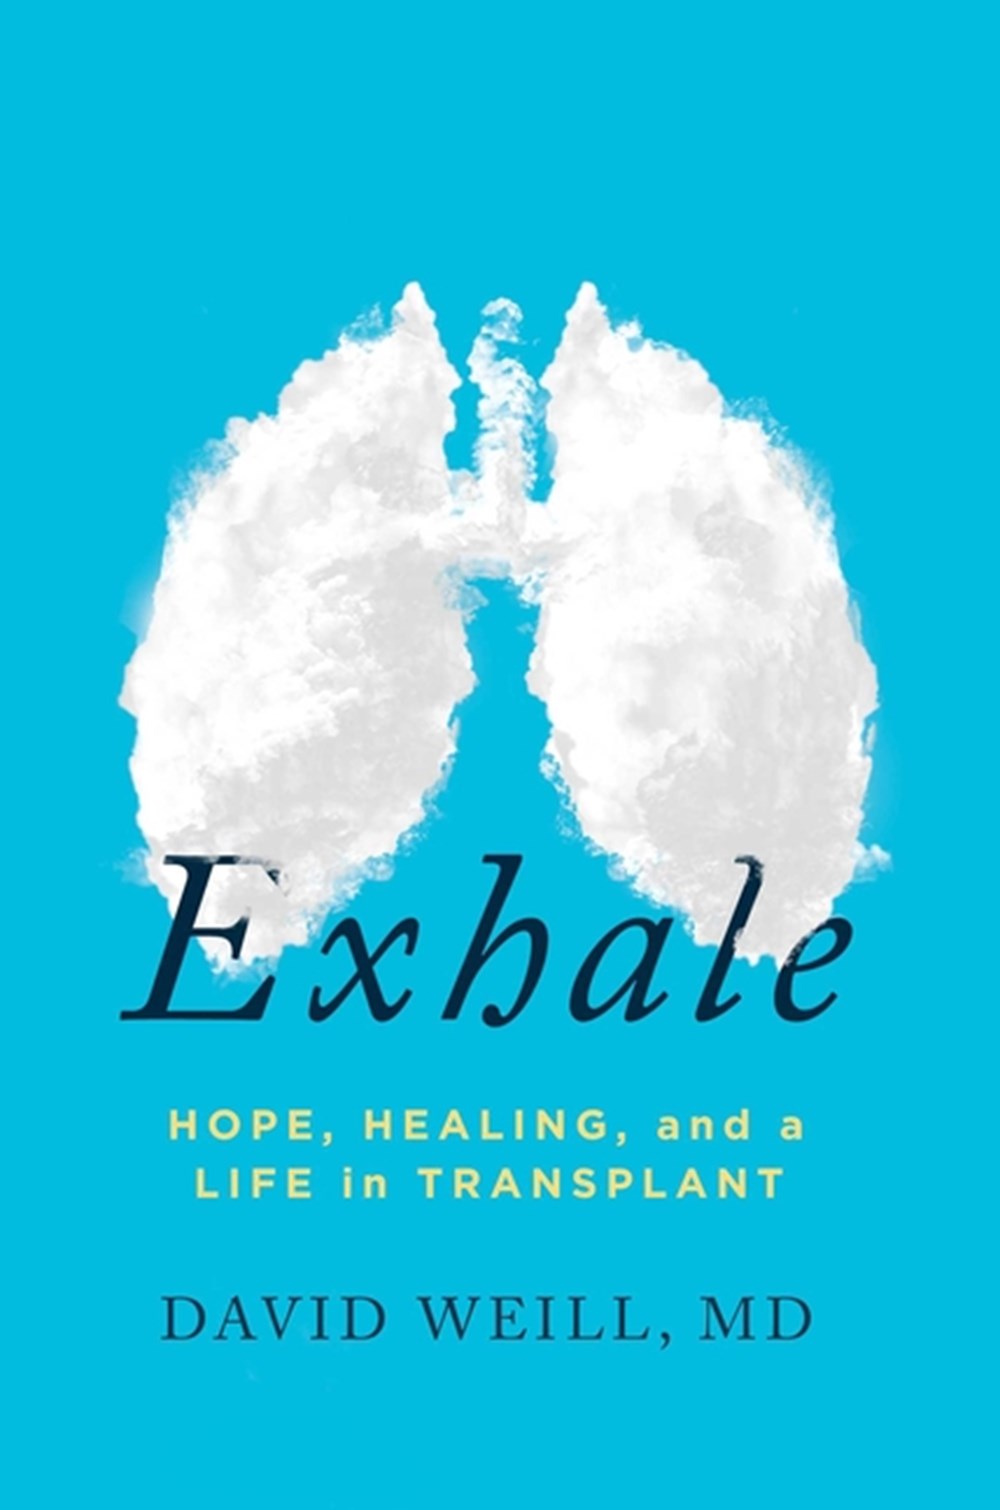 Exhale Hope, Healing, and a Life in Transplant